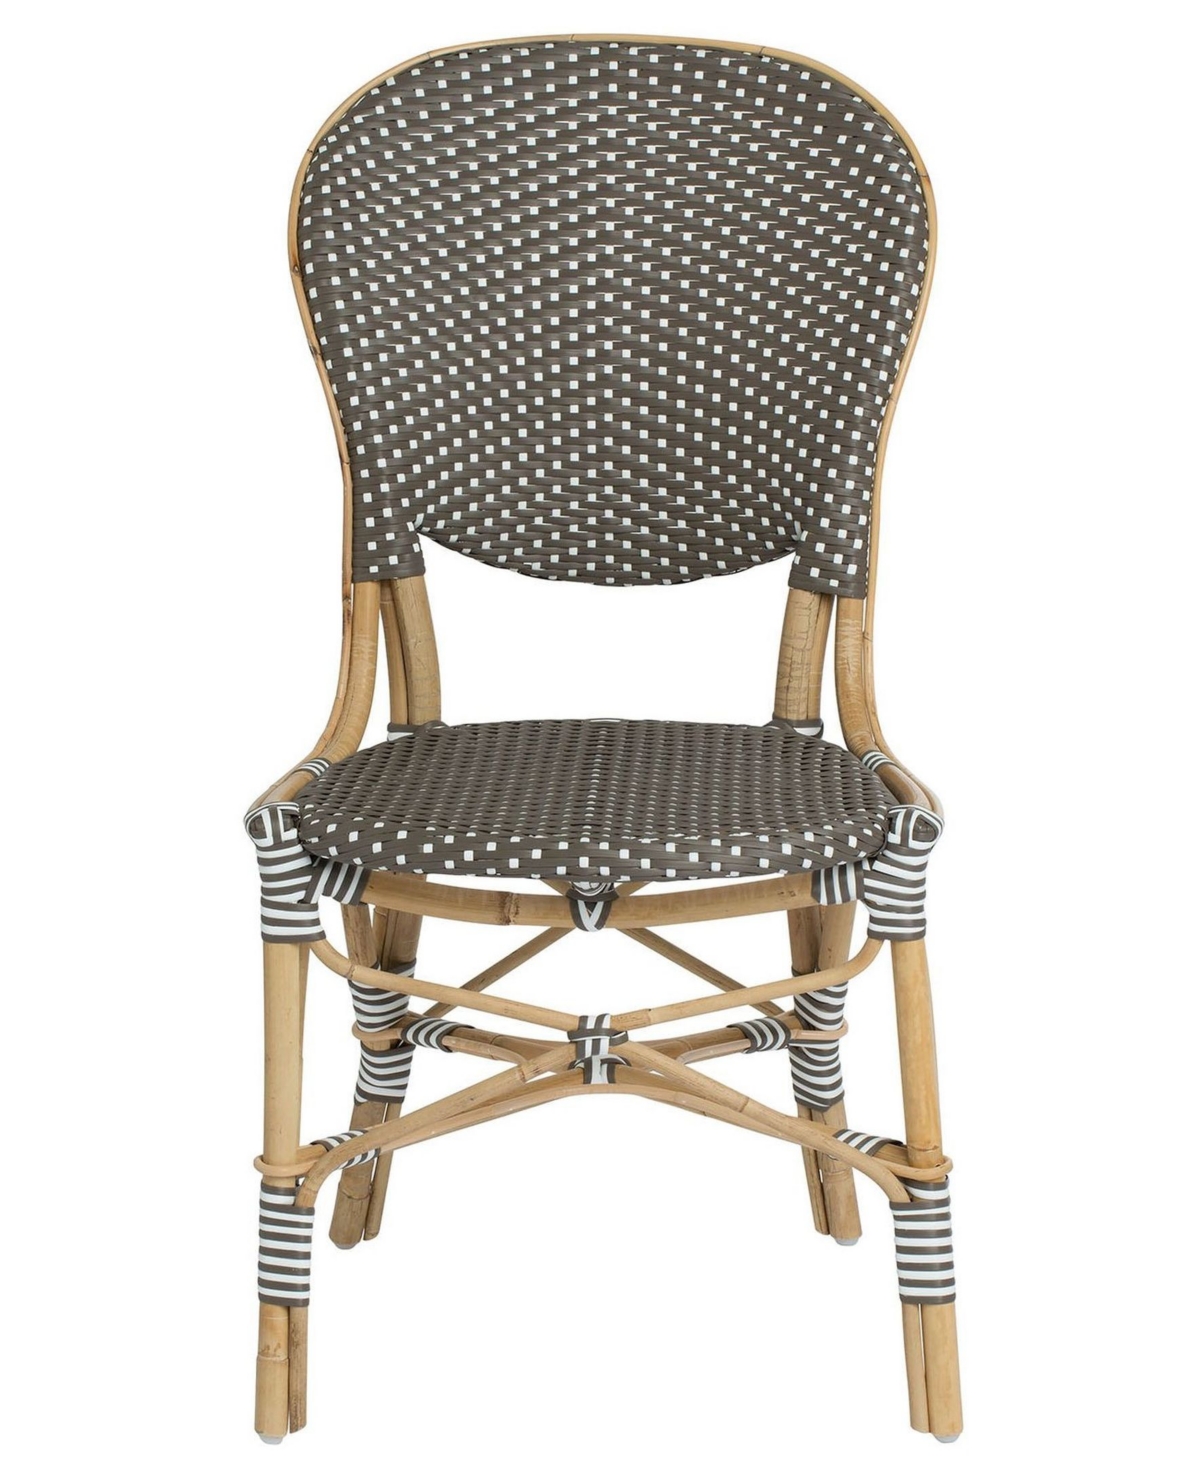 Sika Design Isabell Side Chair In Cappuccino,white Dots